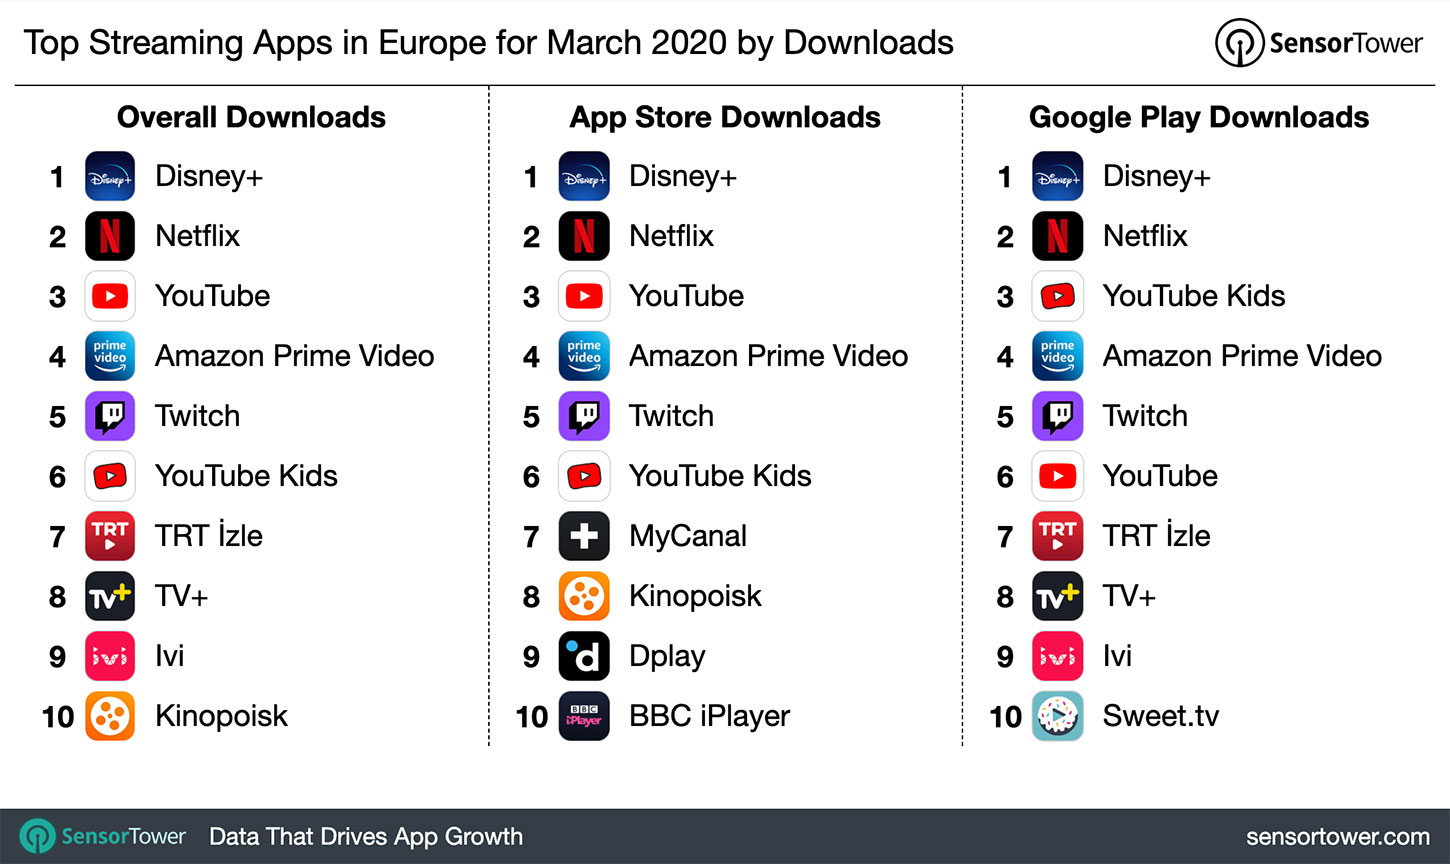 Top Streaming Apps in Europe for March 2020 by Downloads